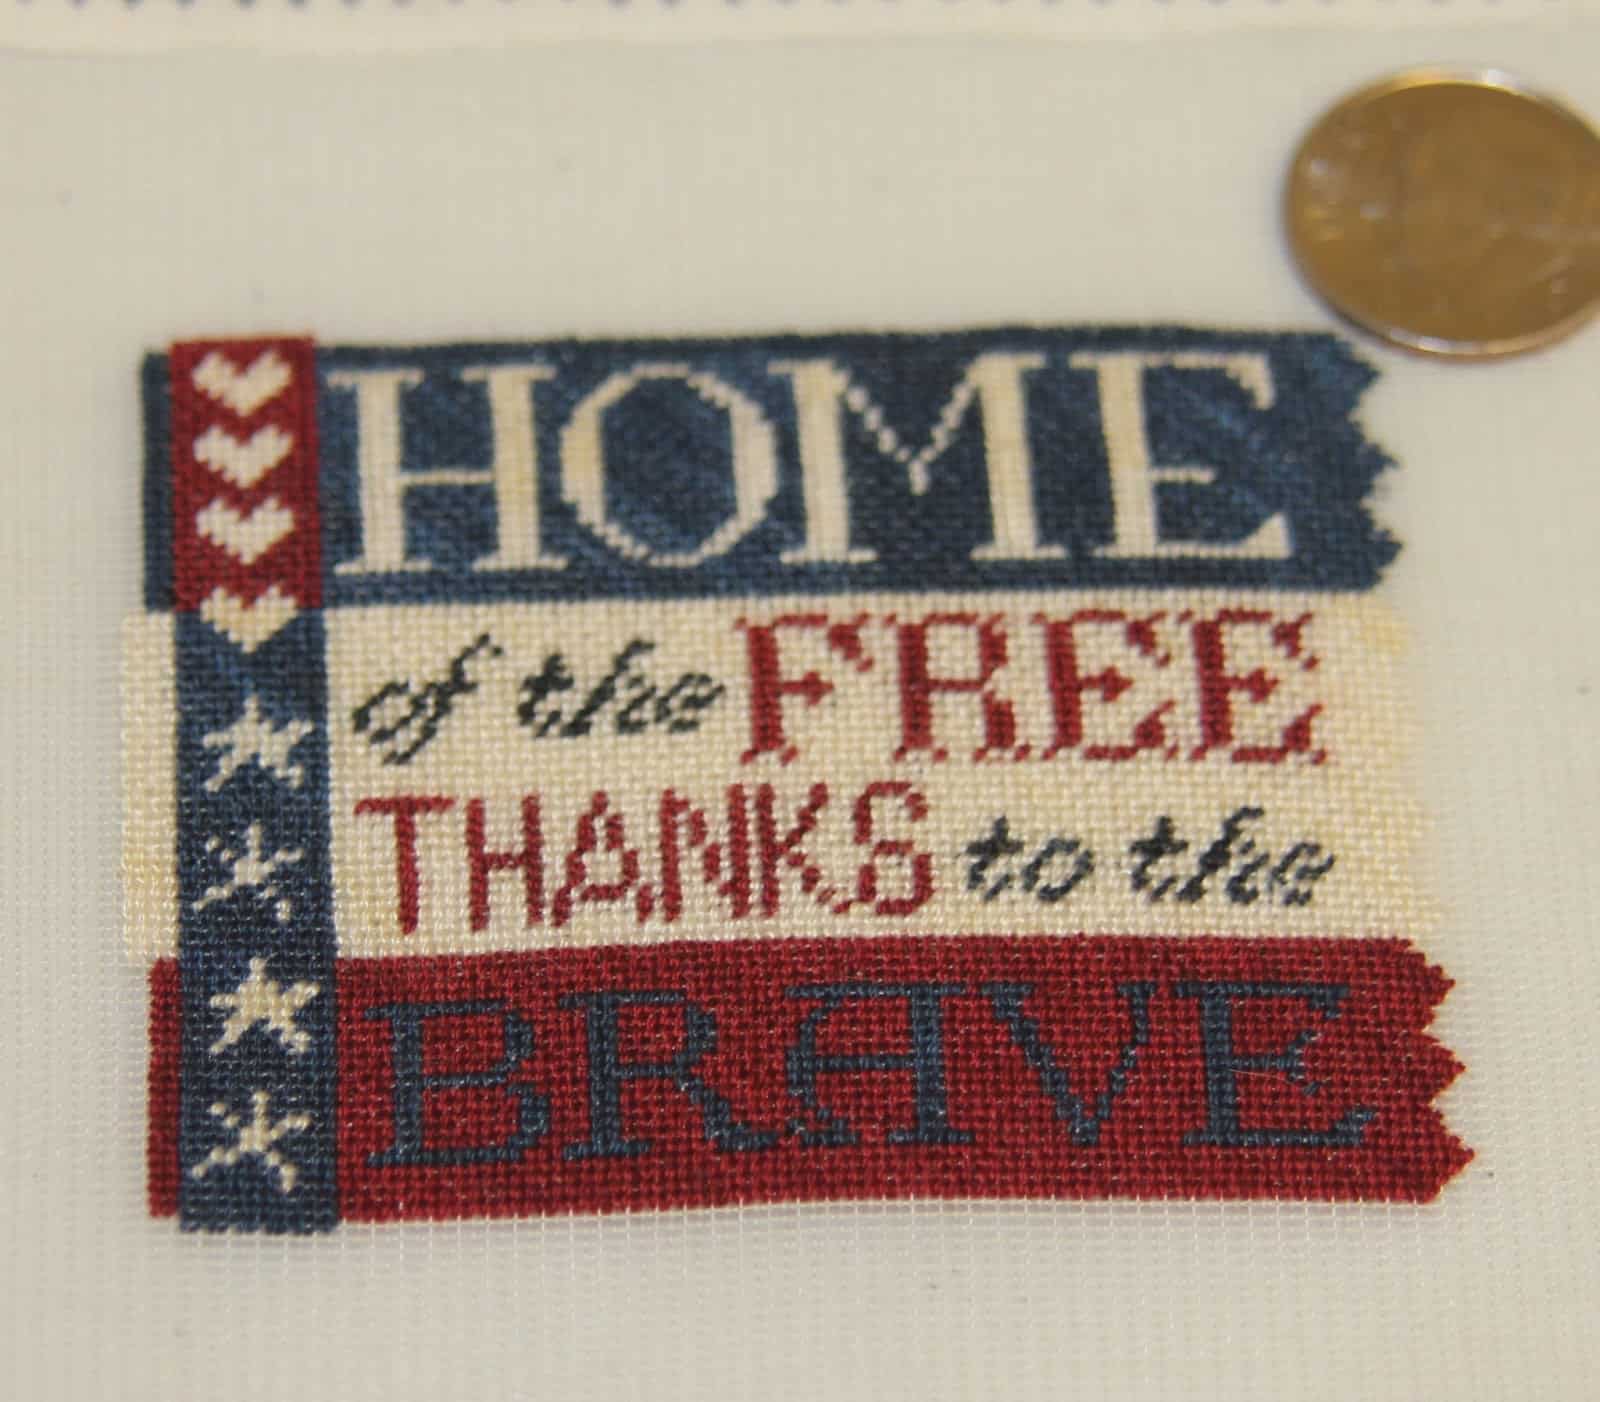 Cyndi S Home of the Free by Erica Michaels Designs